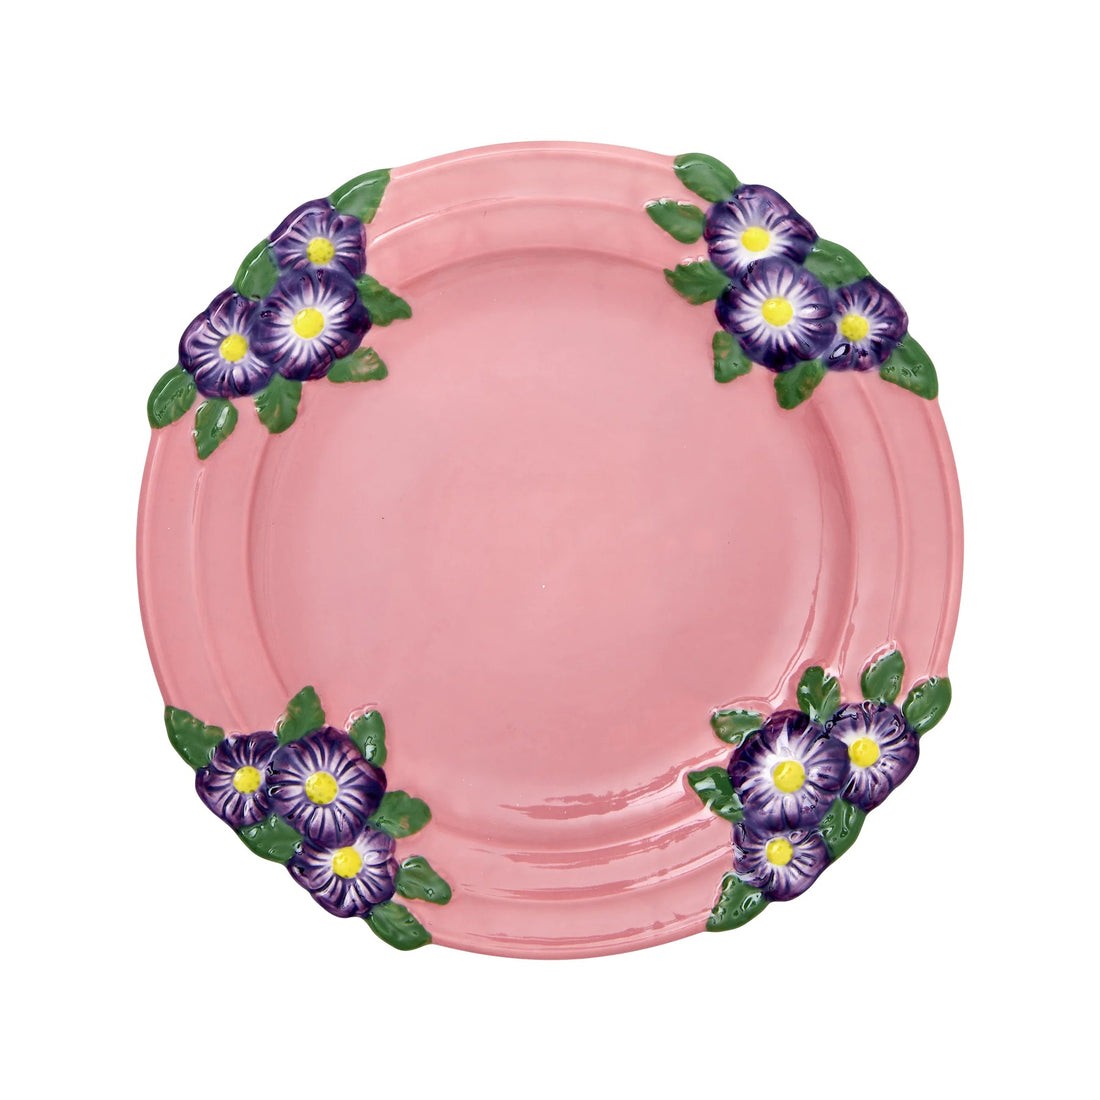 rice-dk-ceramic-lunch-plate-with-embossed-flower-design-pink-rice-celpl-emi